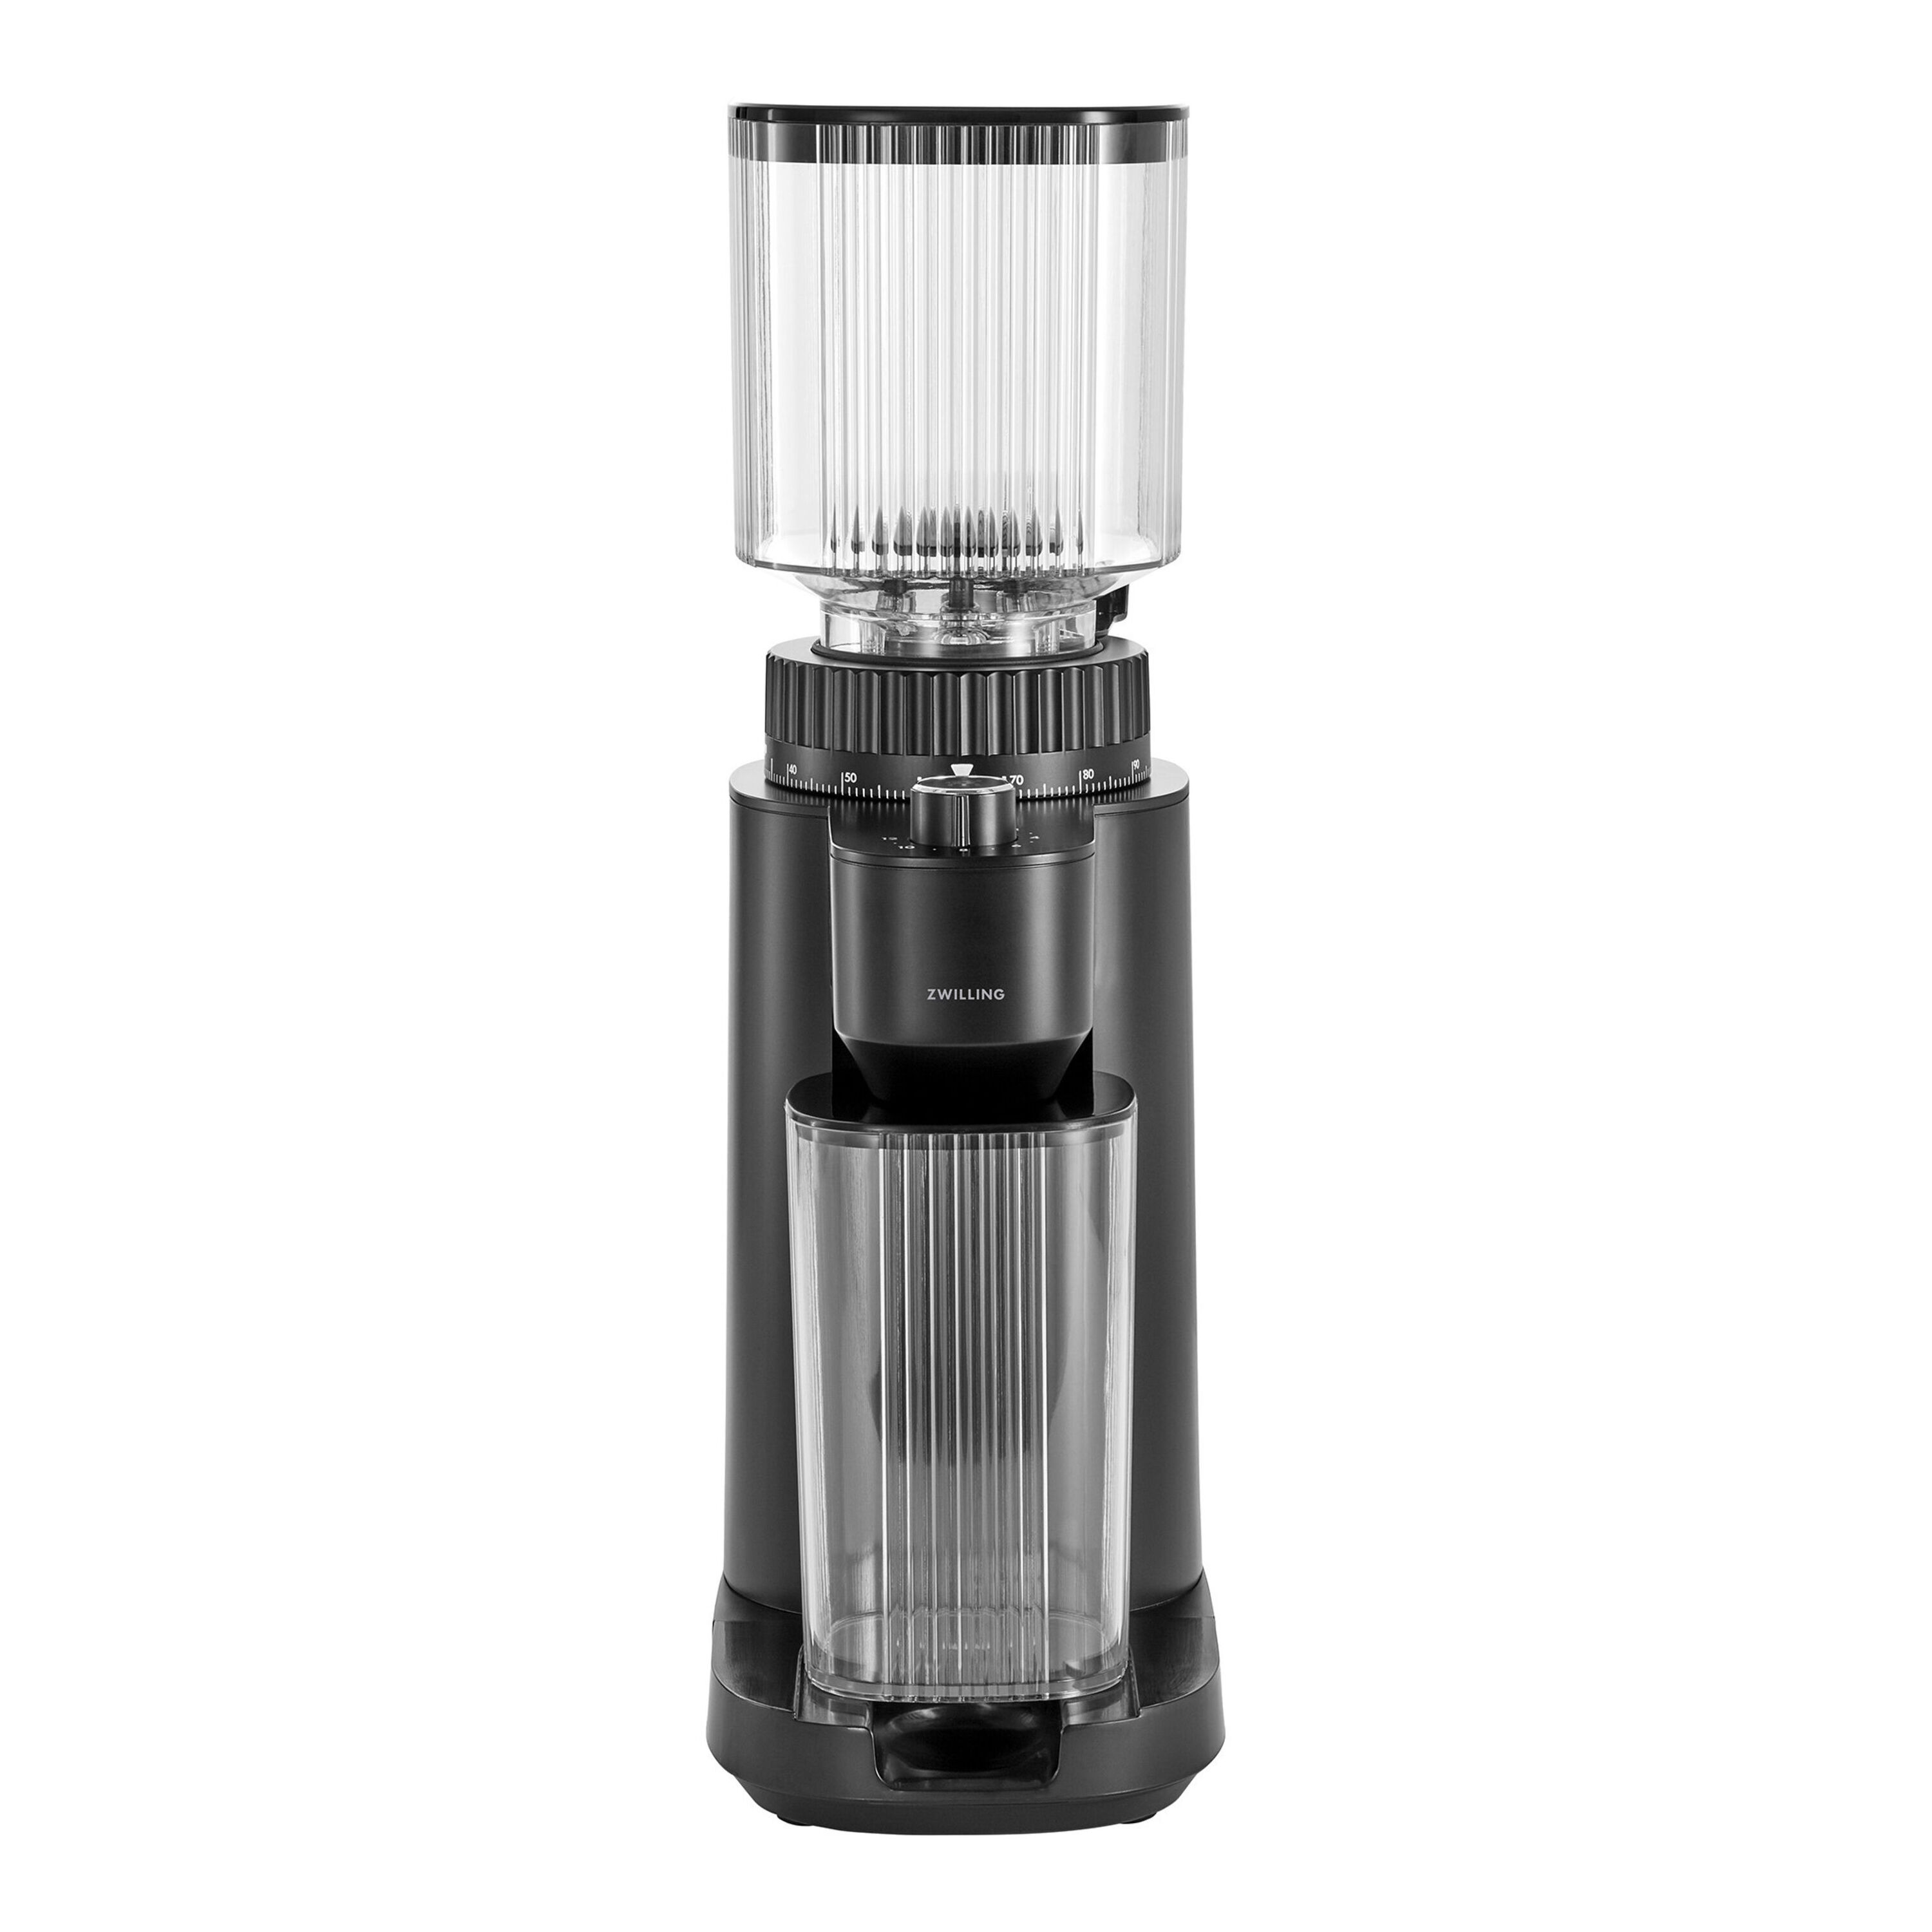 Zwilling Enfinigy Coffee Grinder - Silver